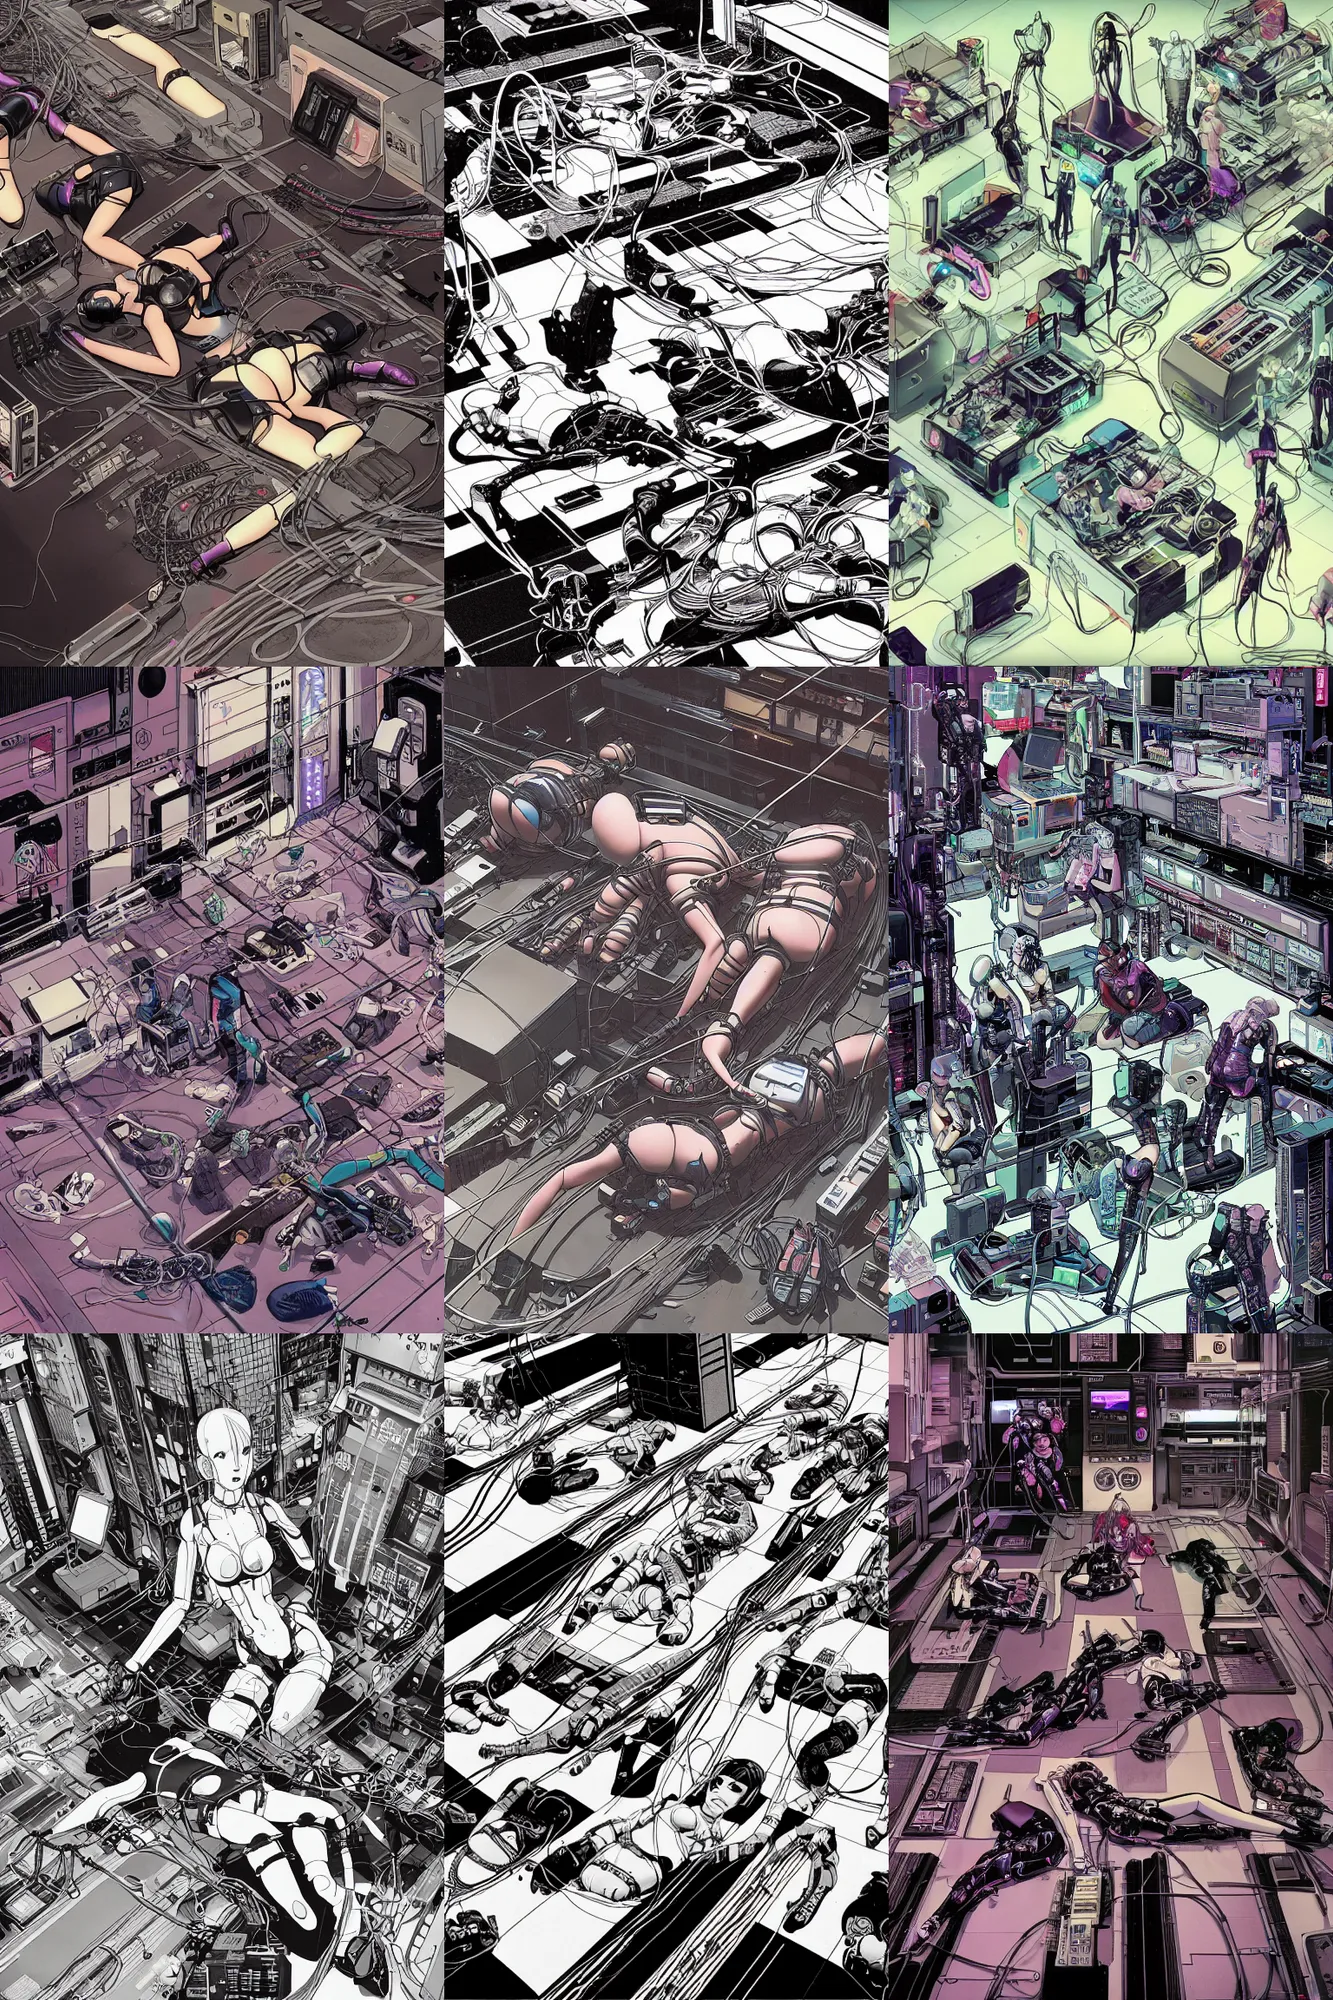 Prompt: a detailed cyberpunk illustration of a group of female androids' bodies lying in various poses over an empty floor, with cables and wires coming out, by masamune shirow and katsuhiro otomo, wide angle